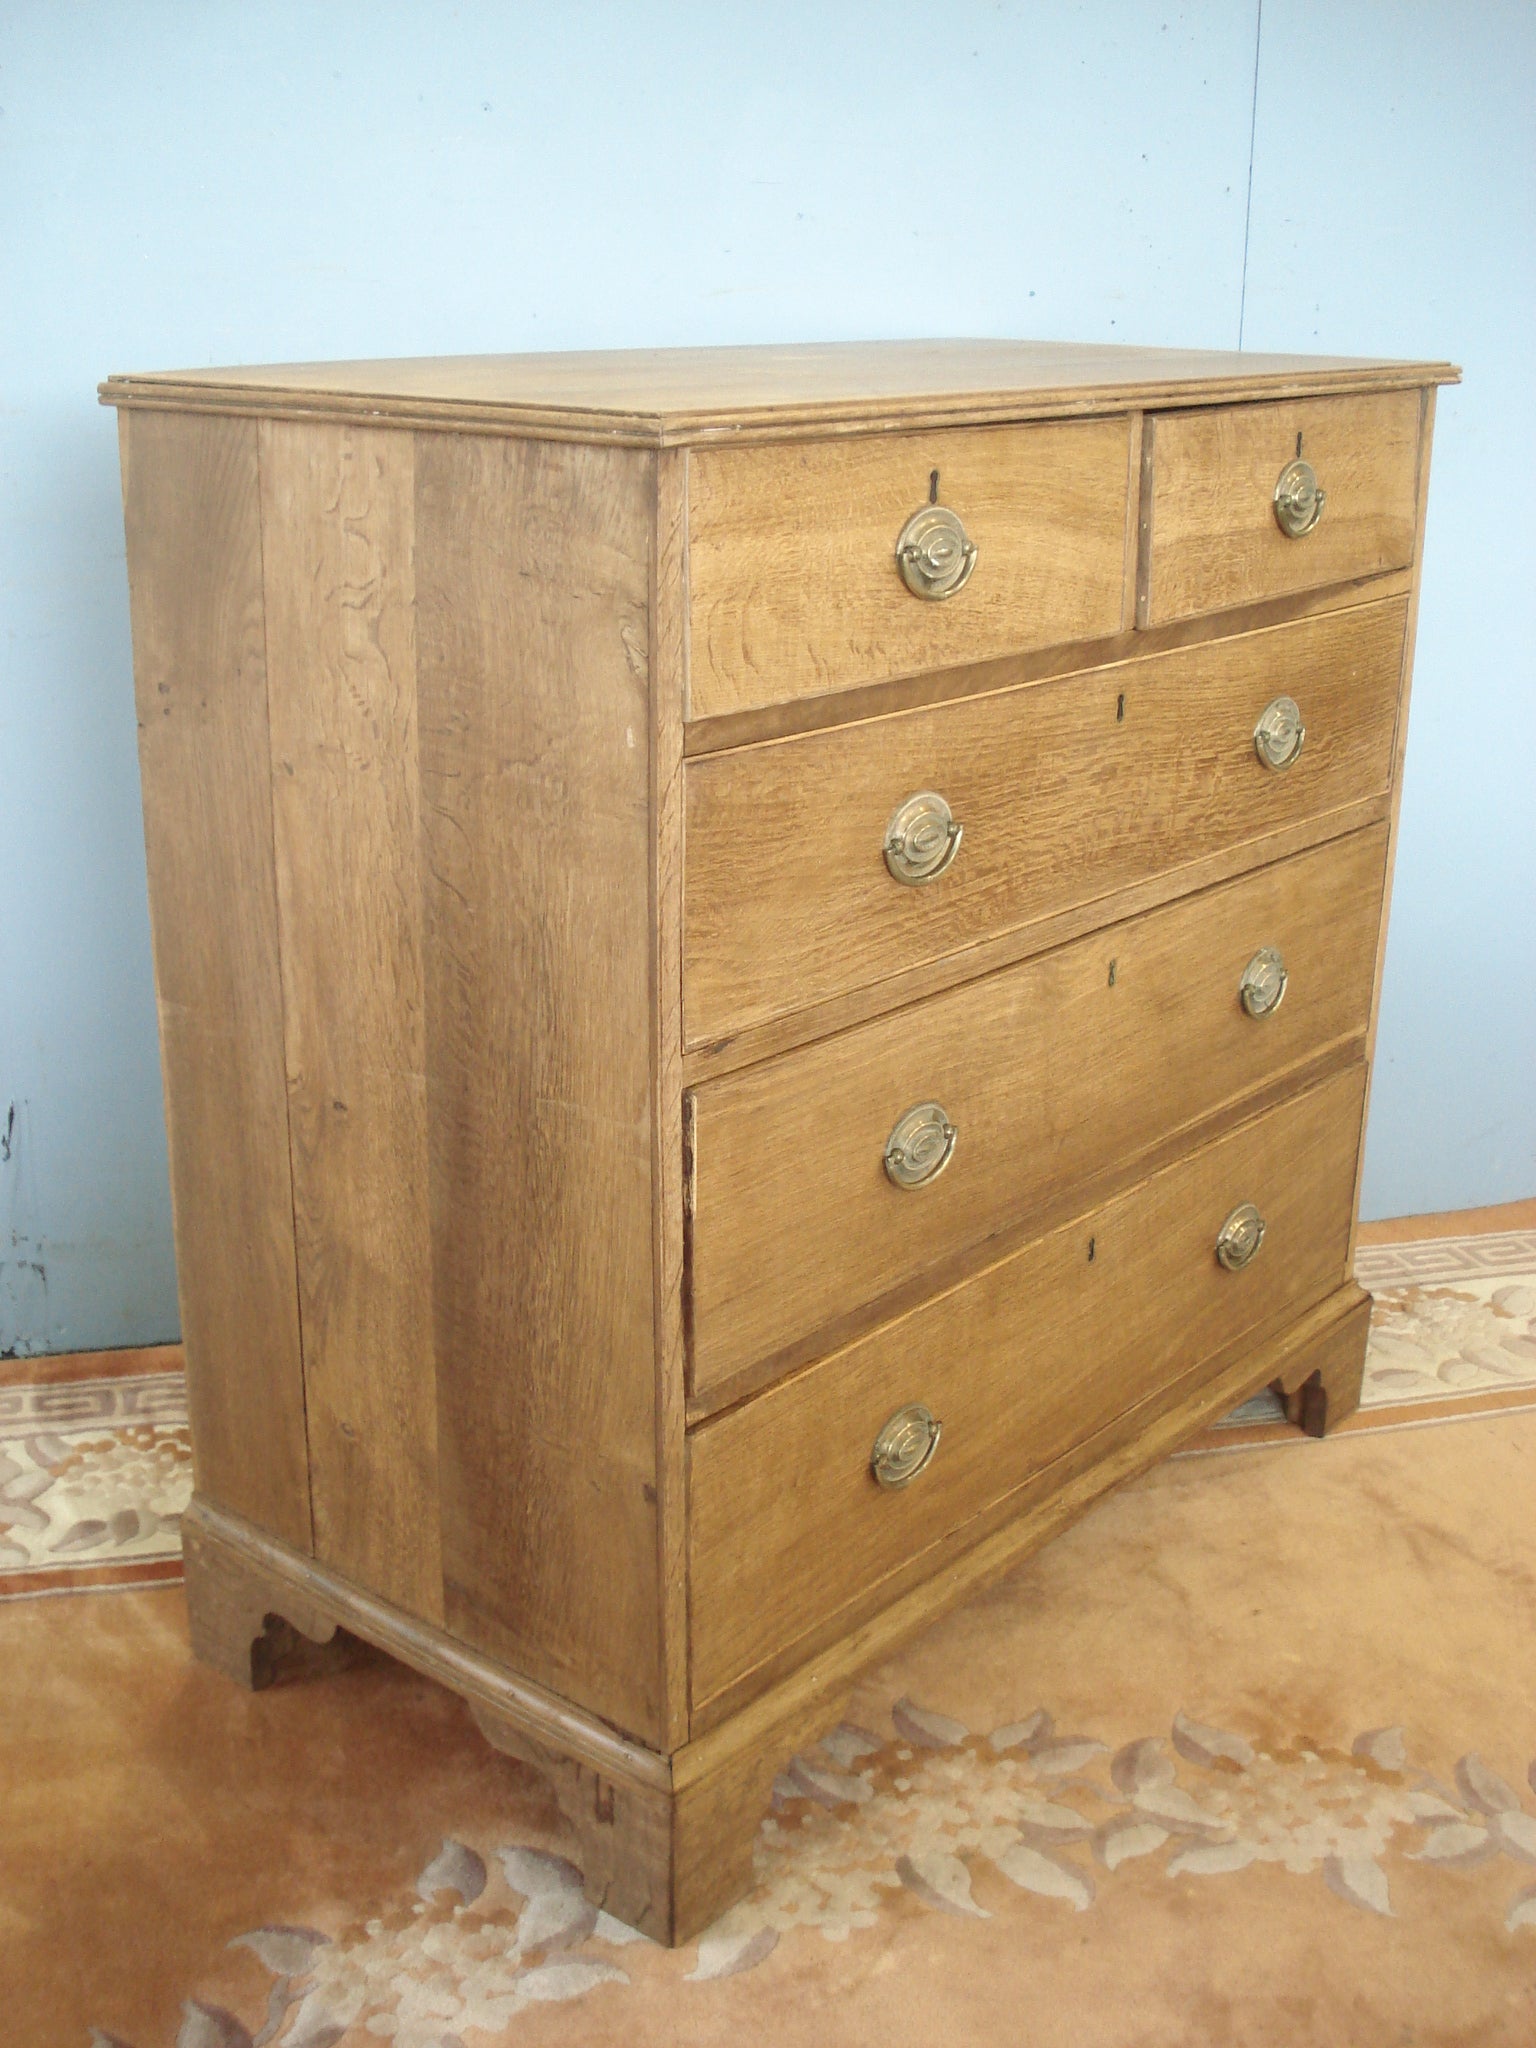 Circa 1830 Cross banded blonde oak five drawer chest